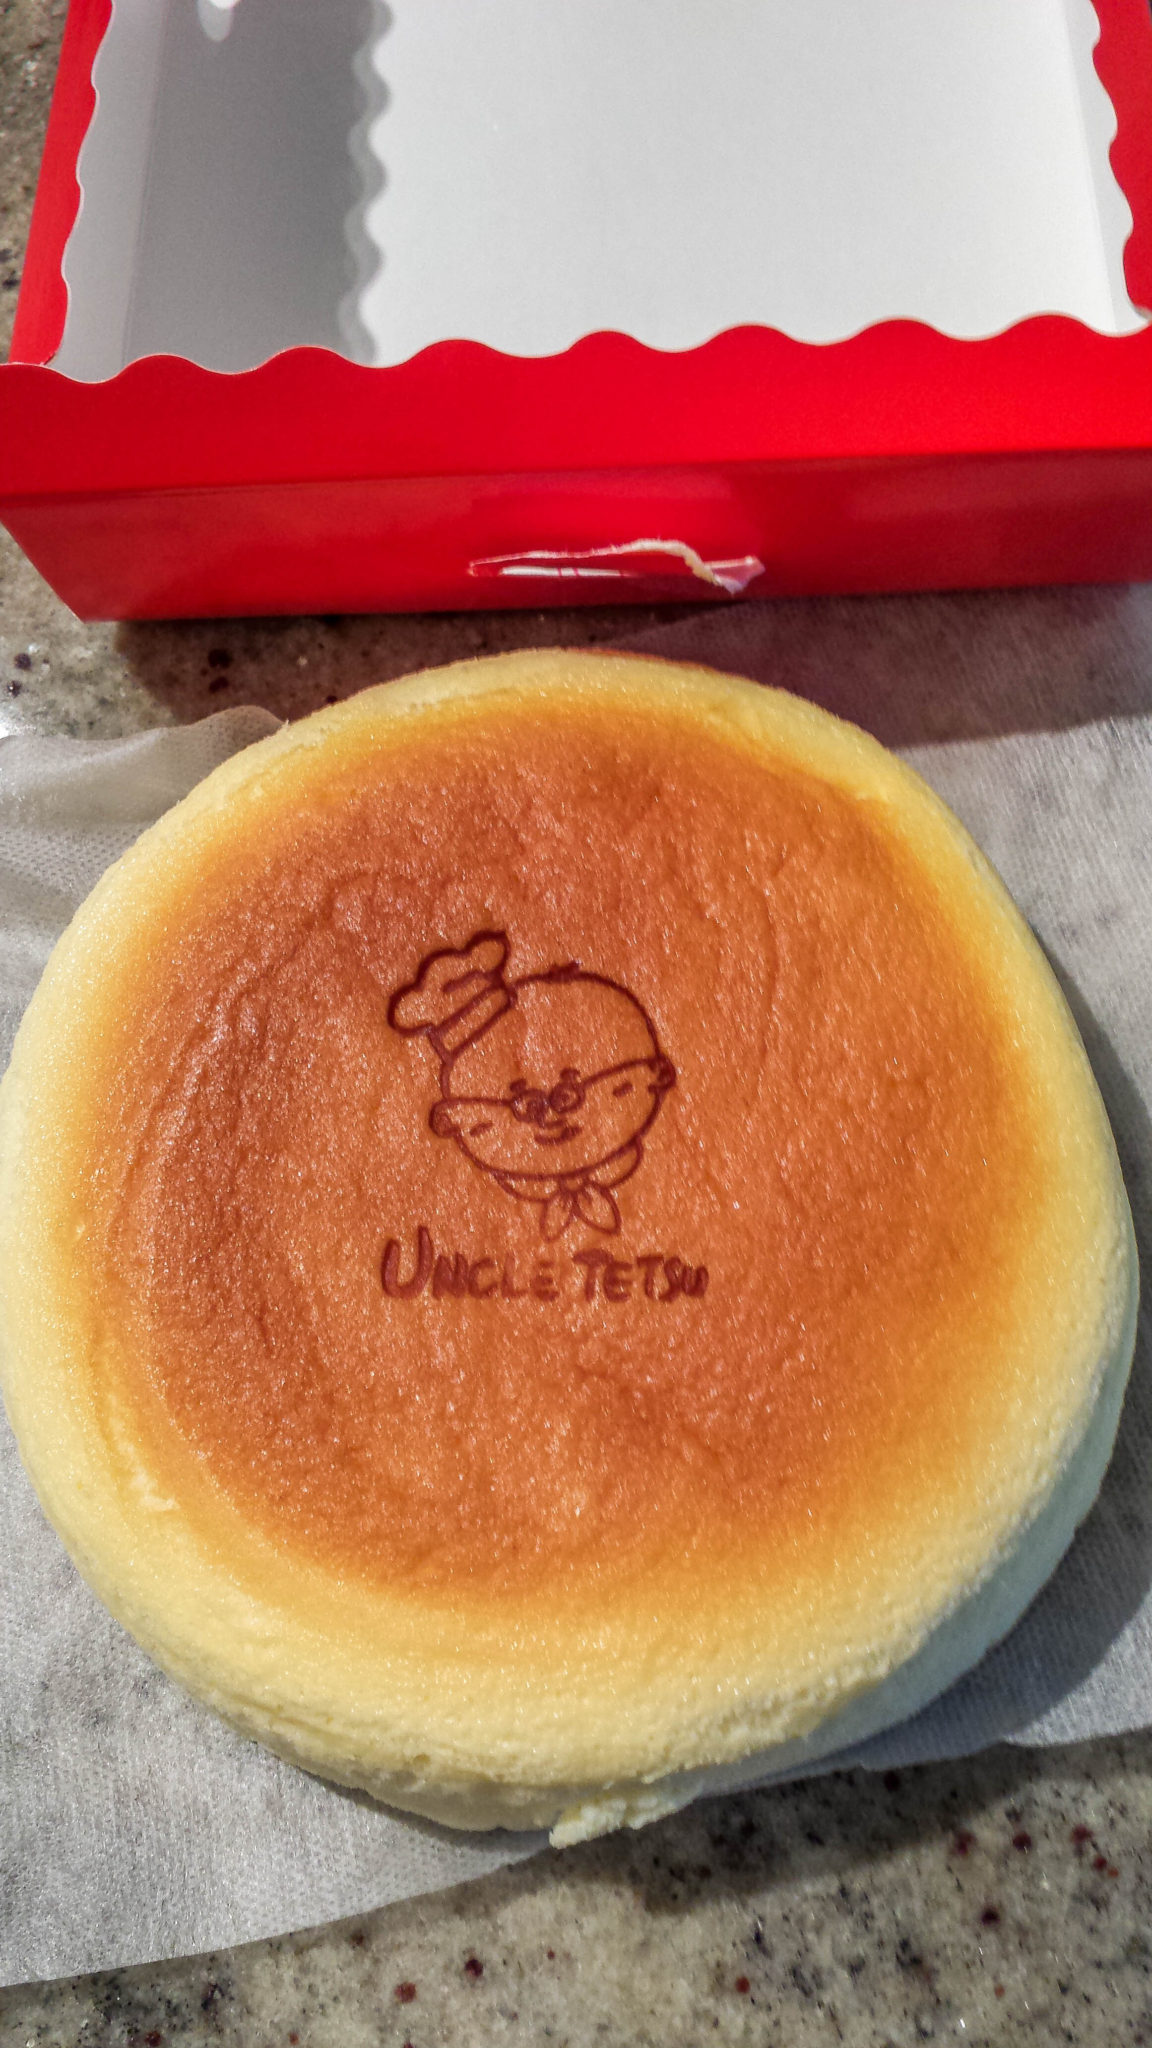 A whole plain cheesecake from Uncle Tetsu's in Toronto